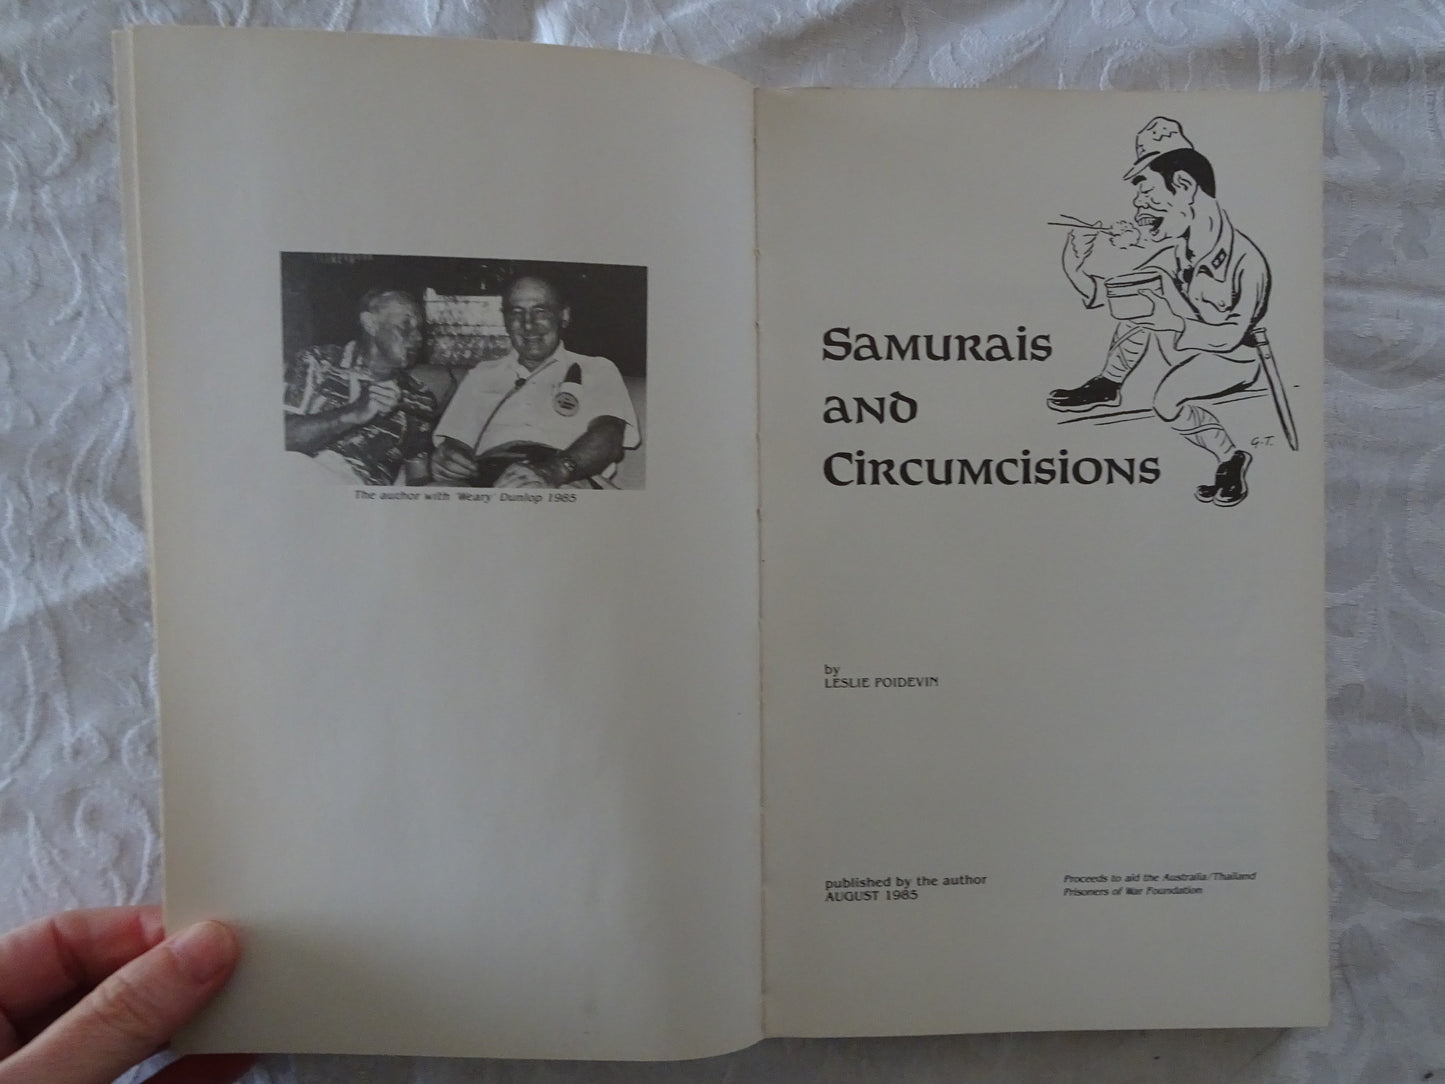 Samurais and Circumcisions by Leslie Poidevin